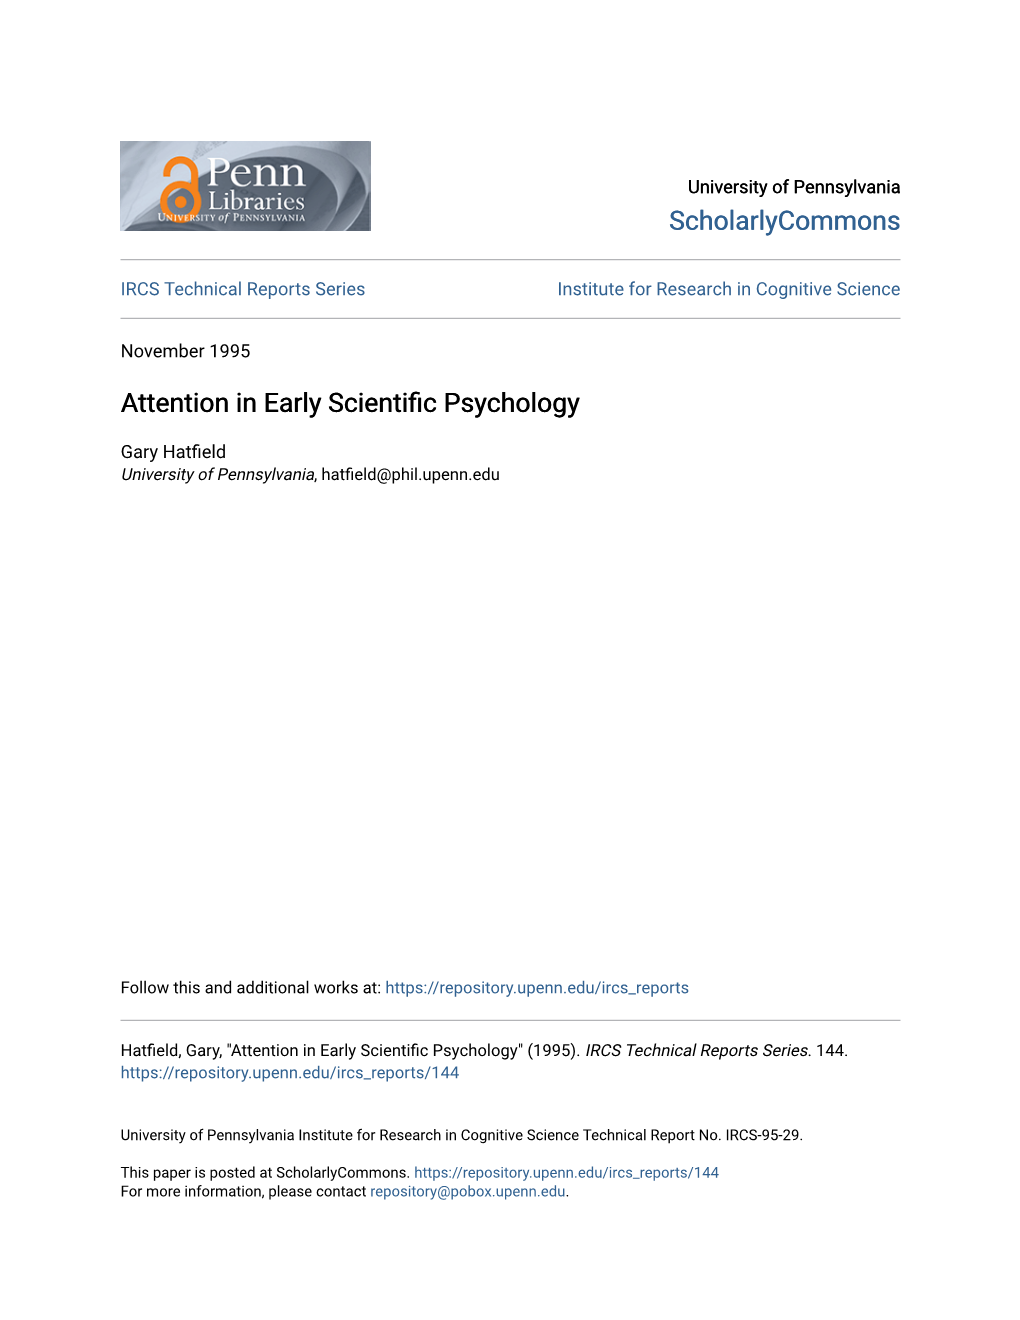 Attention in Early Scientific Psychology